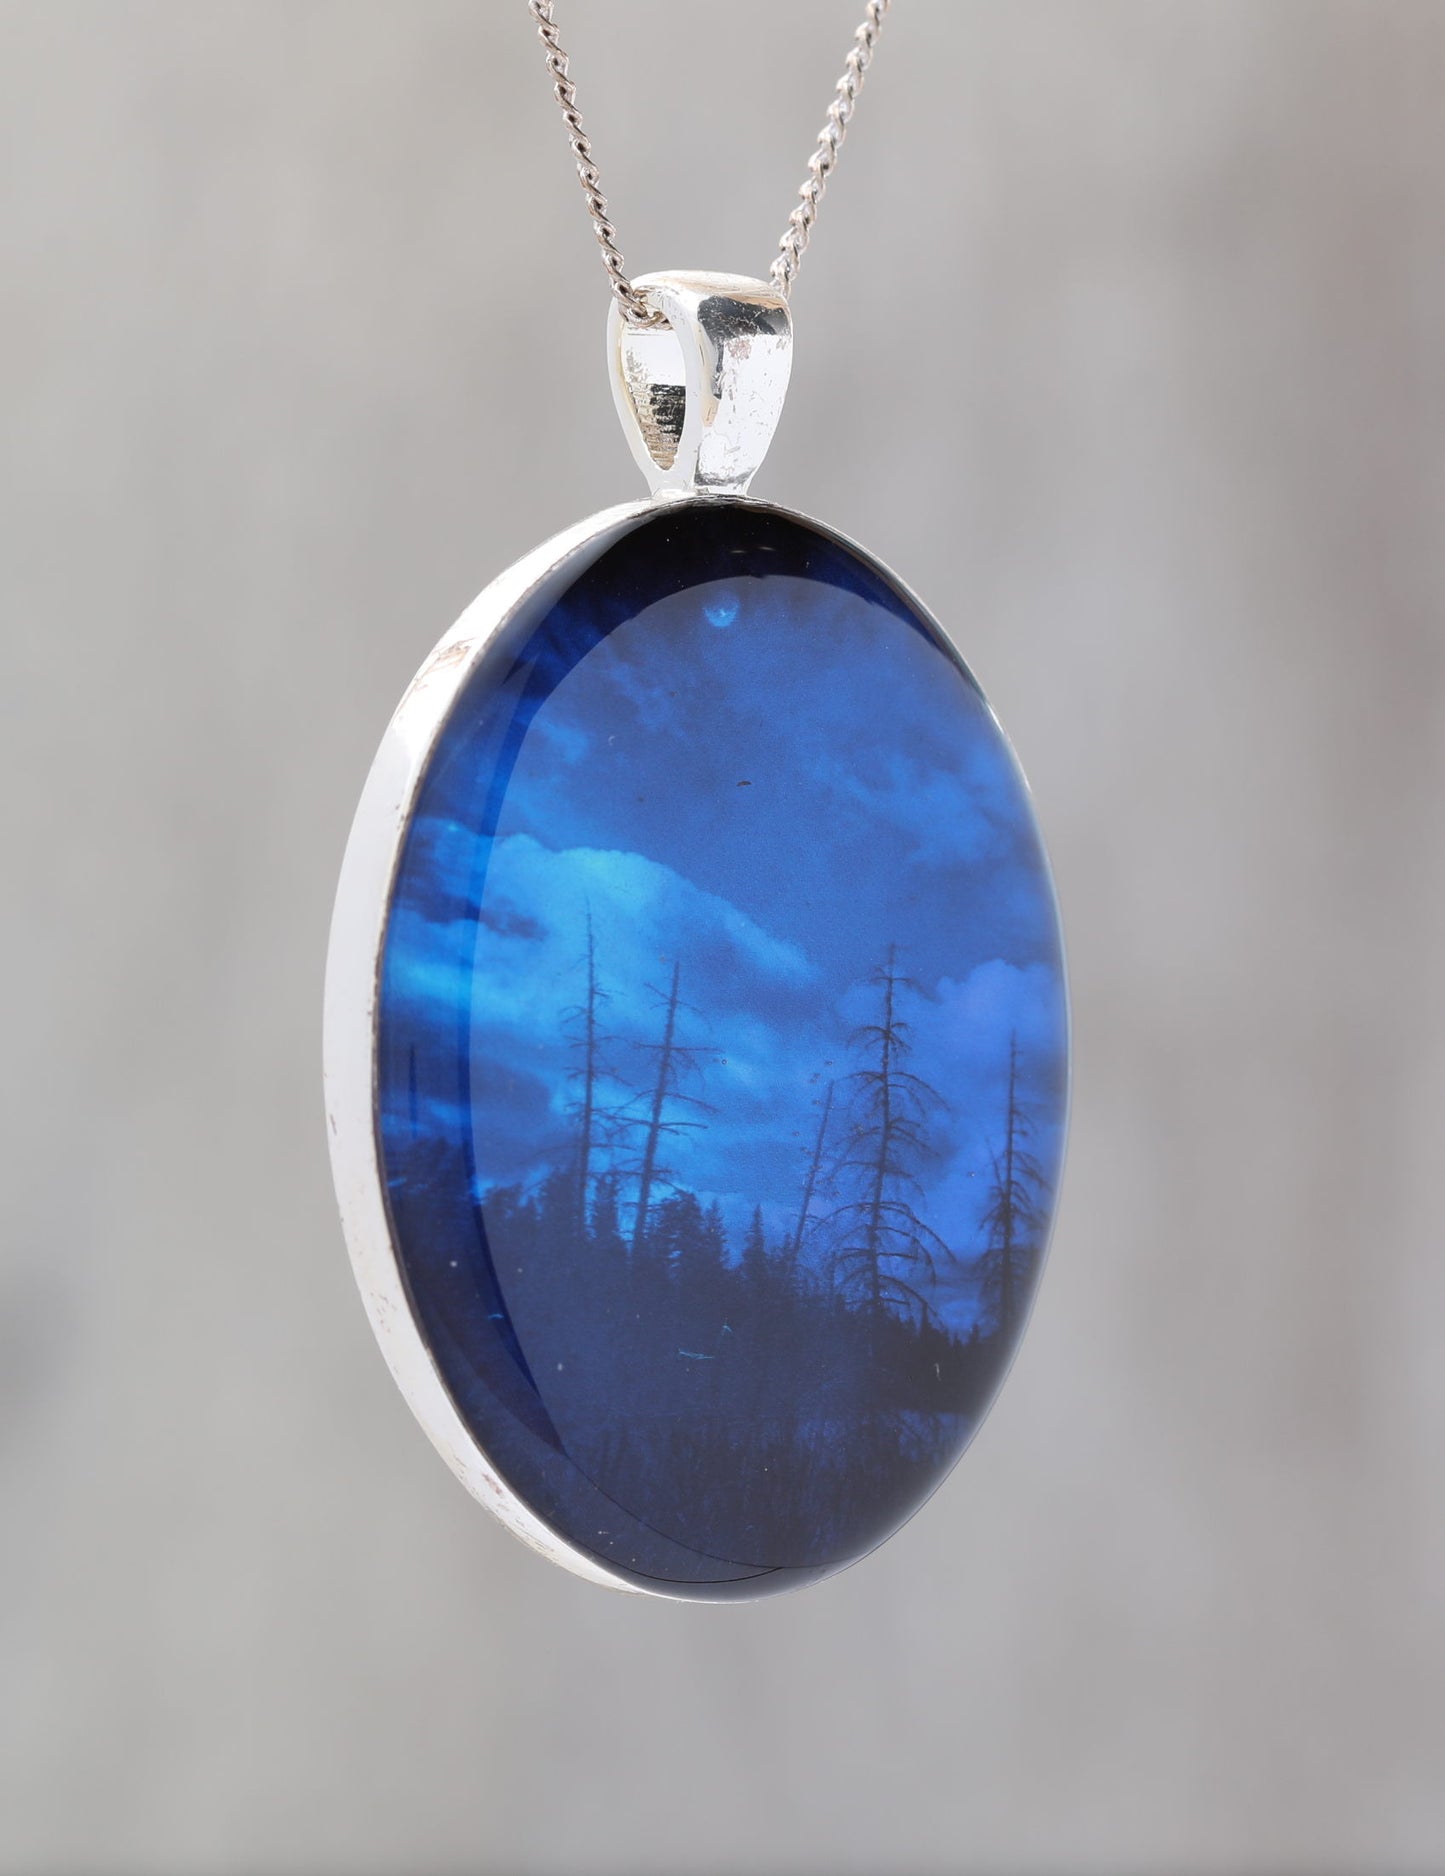 Blue Sky At Night  - Glow-in-the-dark pendant with the Orion Nebula